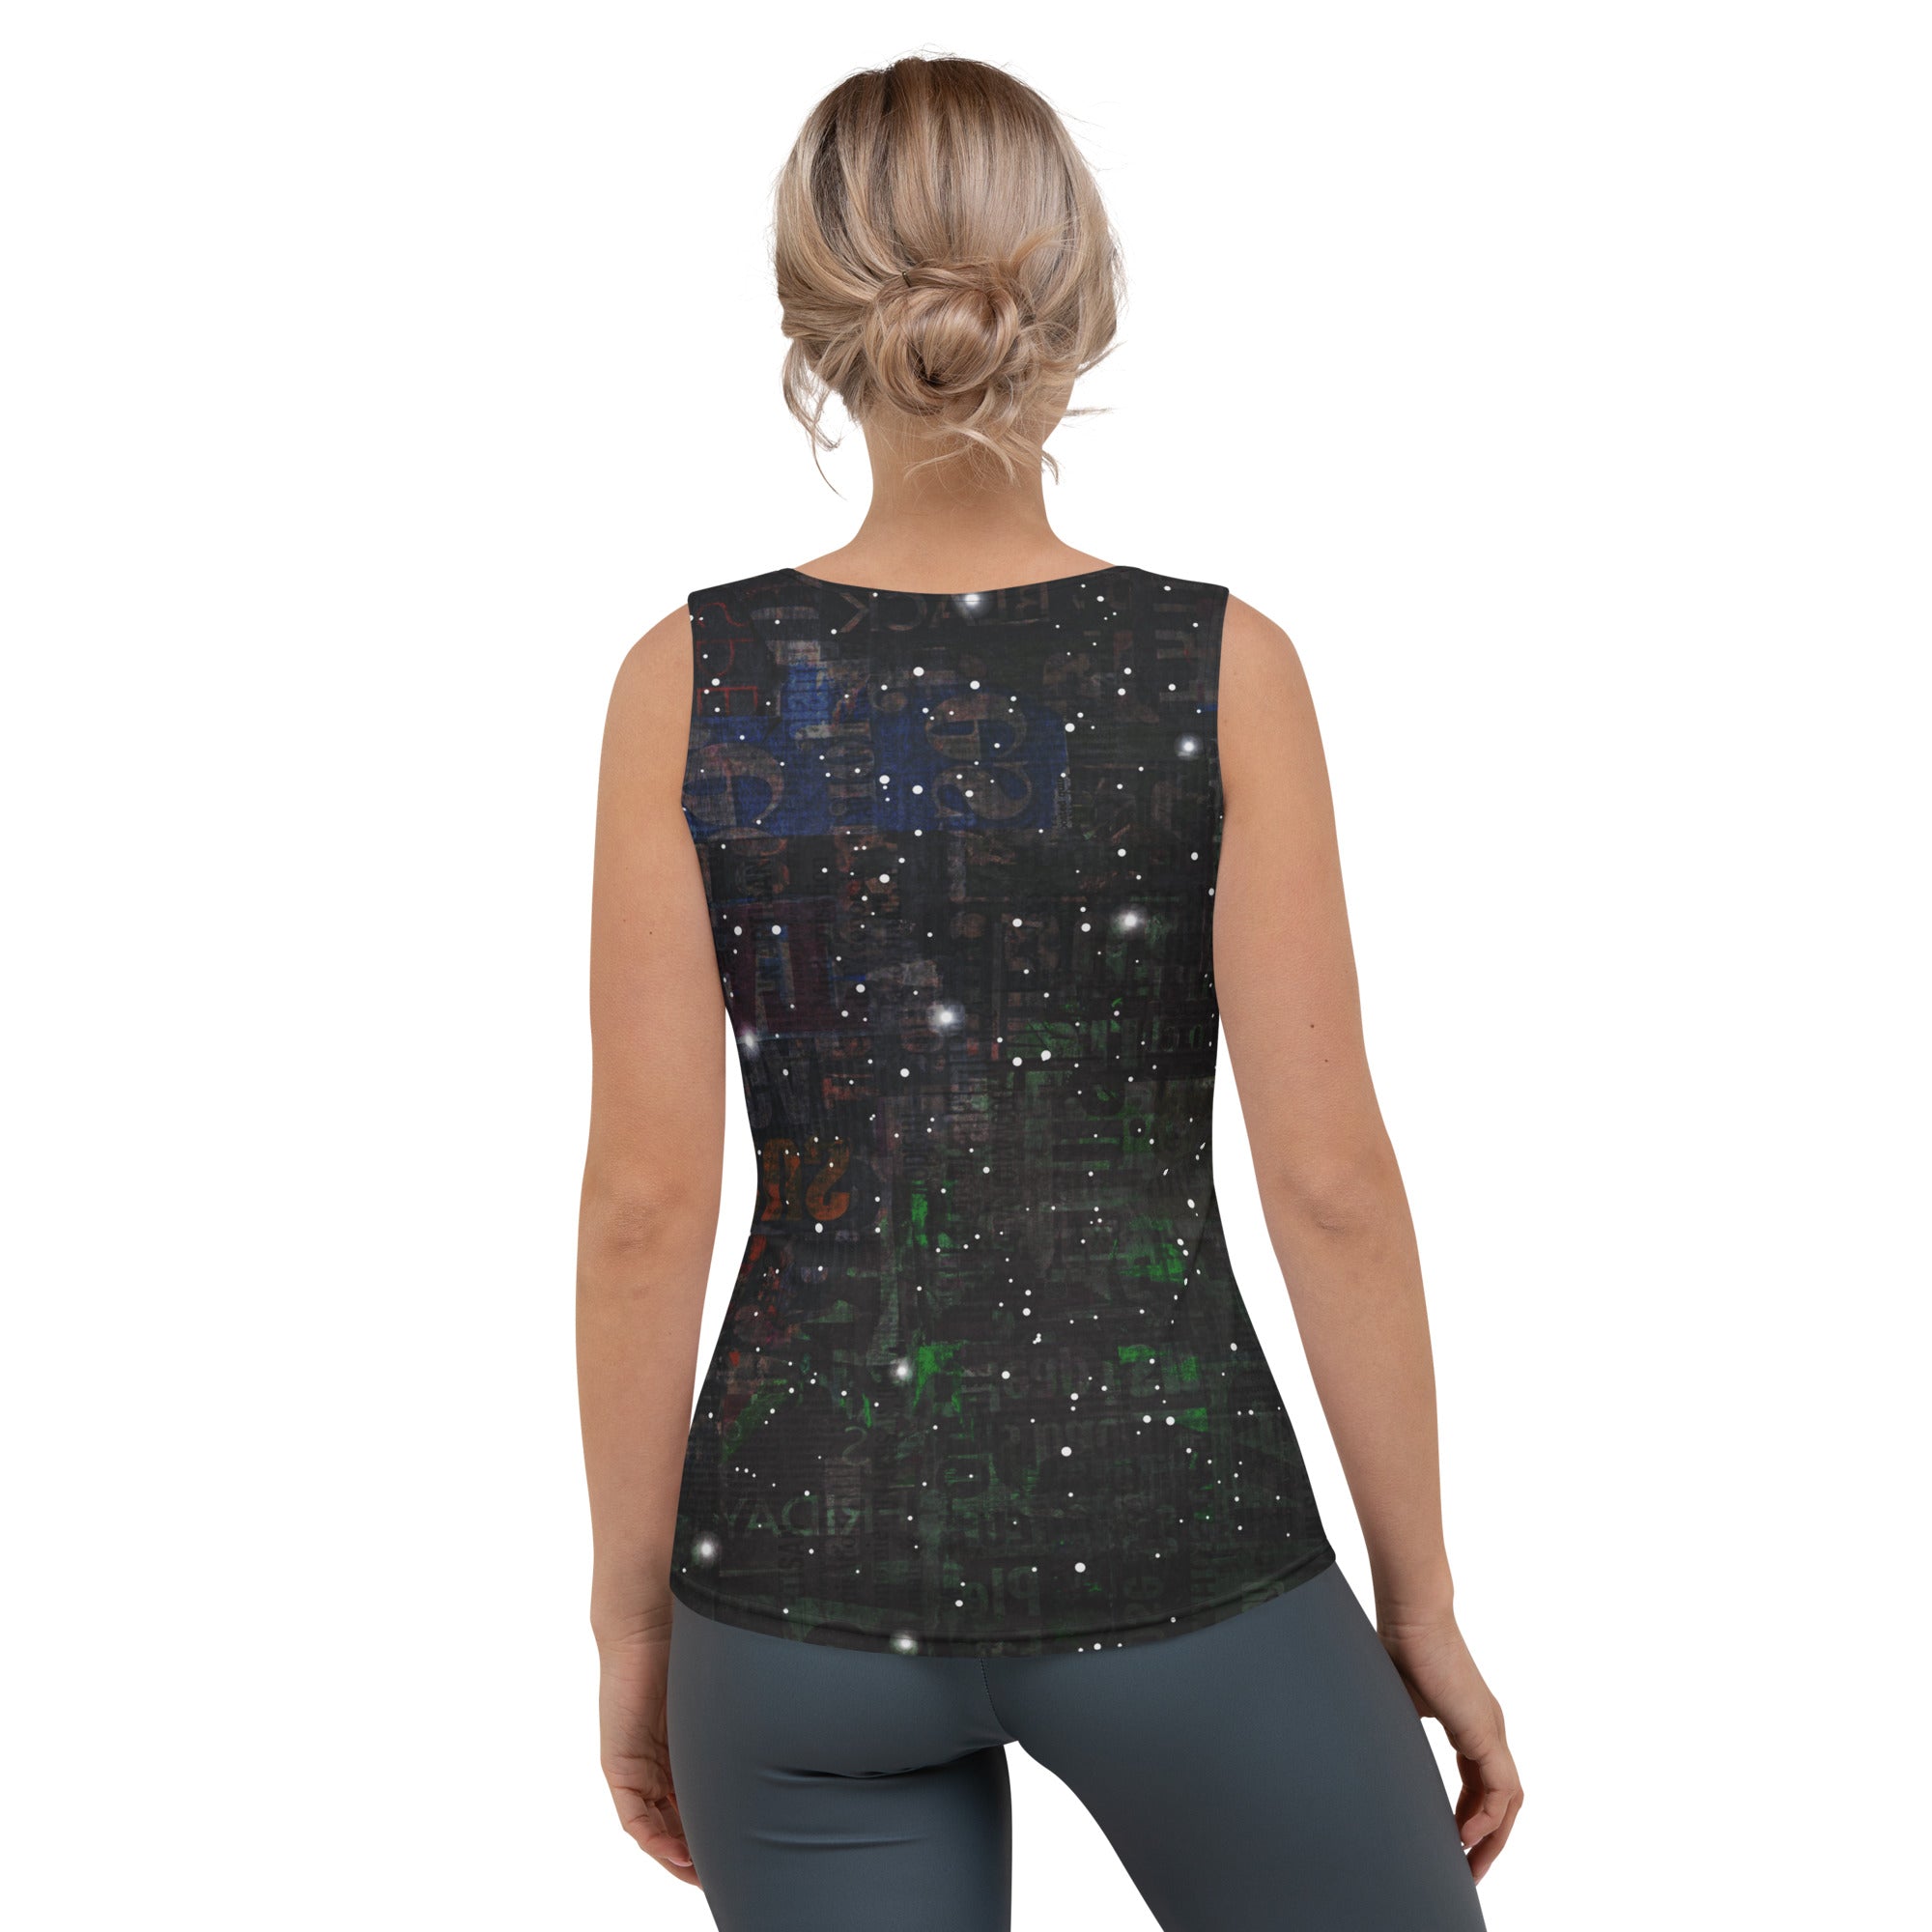 Rhapsodic Rose Reflections Sublimation Cut & Sew Tank Top